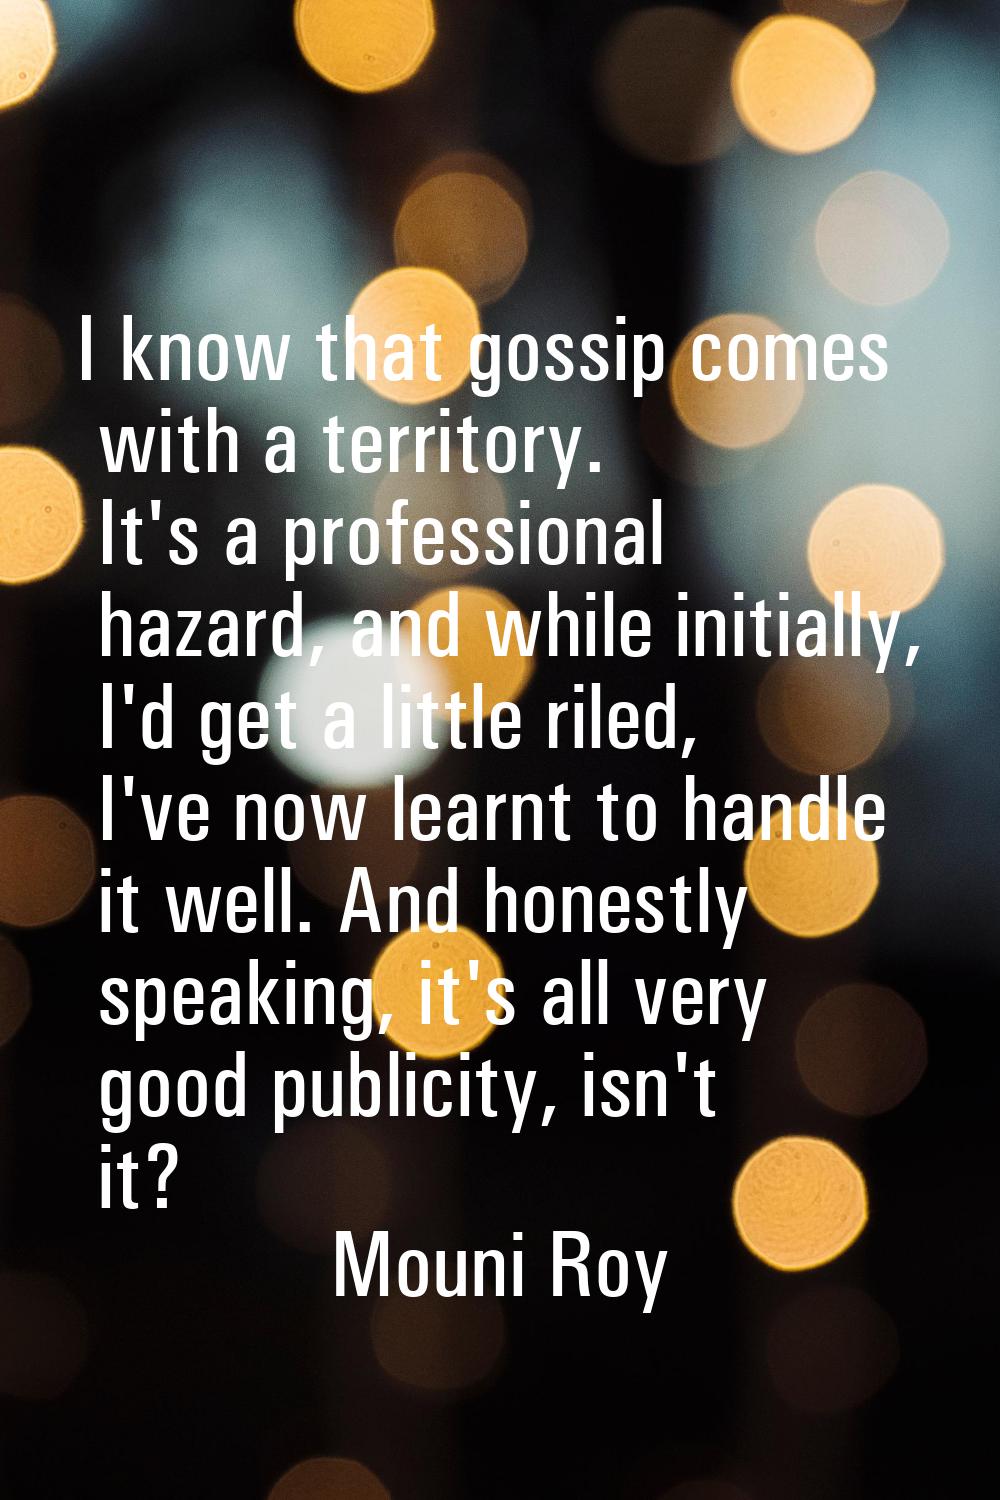 I know that gossip comes with a territory. It's a professional hazard, and while initially, I'd get